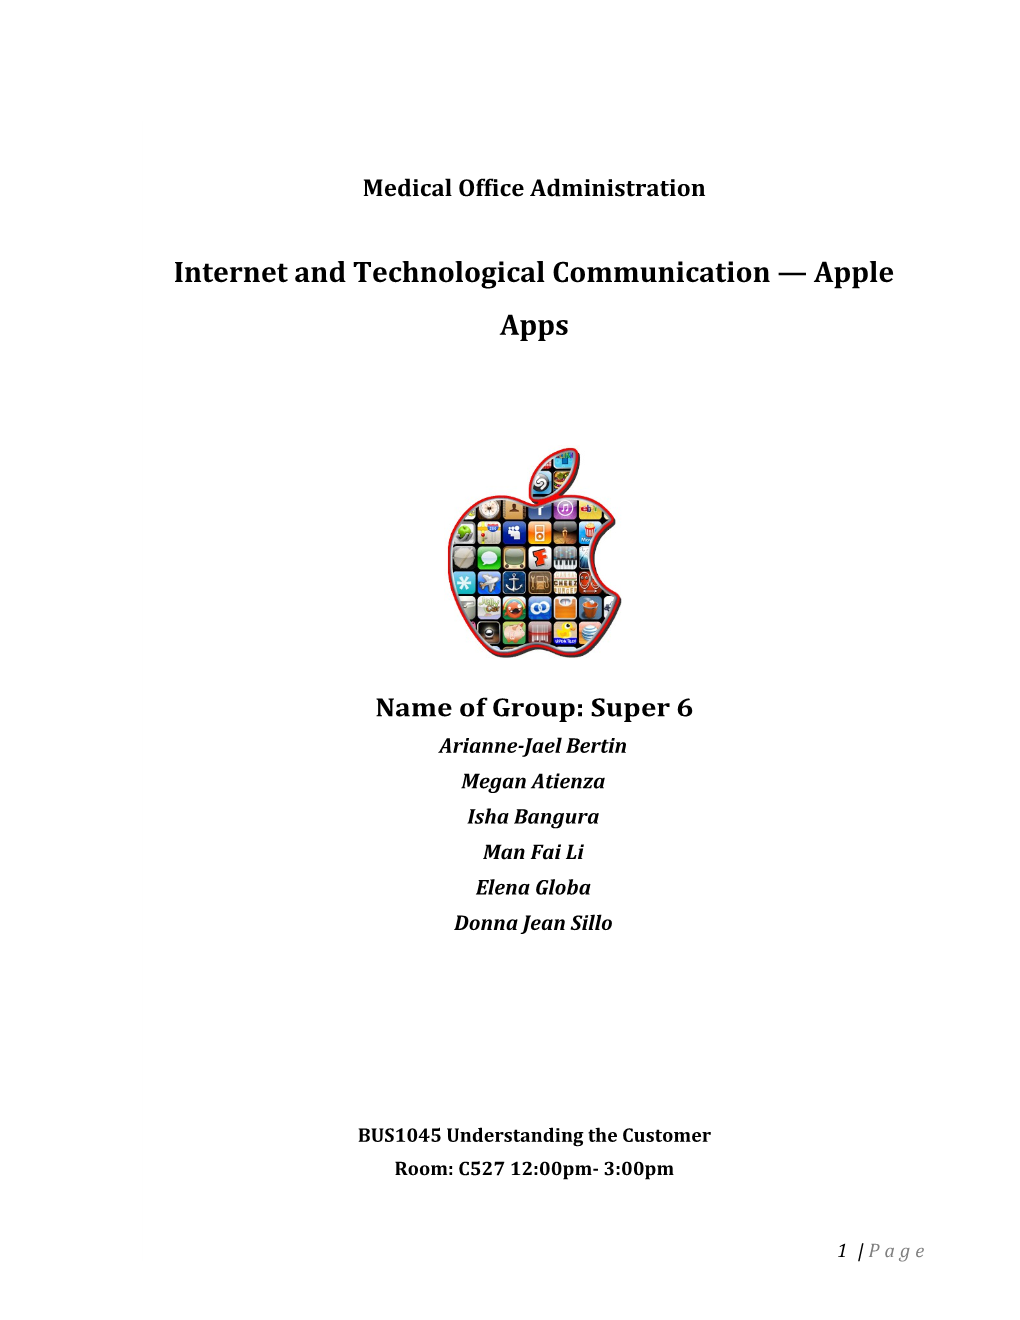 Internet and Technological Communication Apple Apps